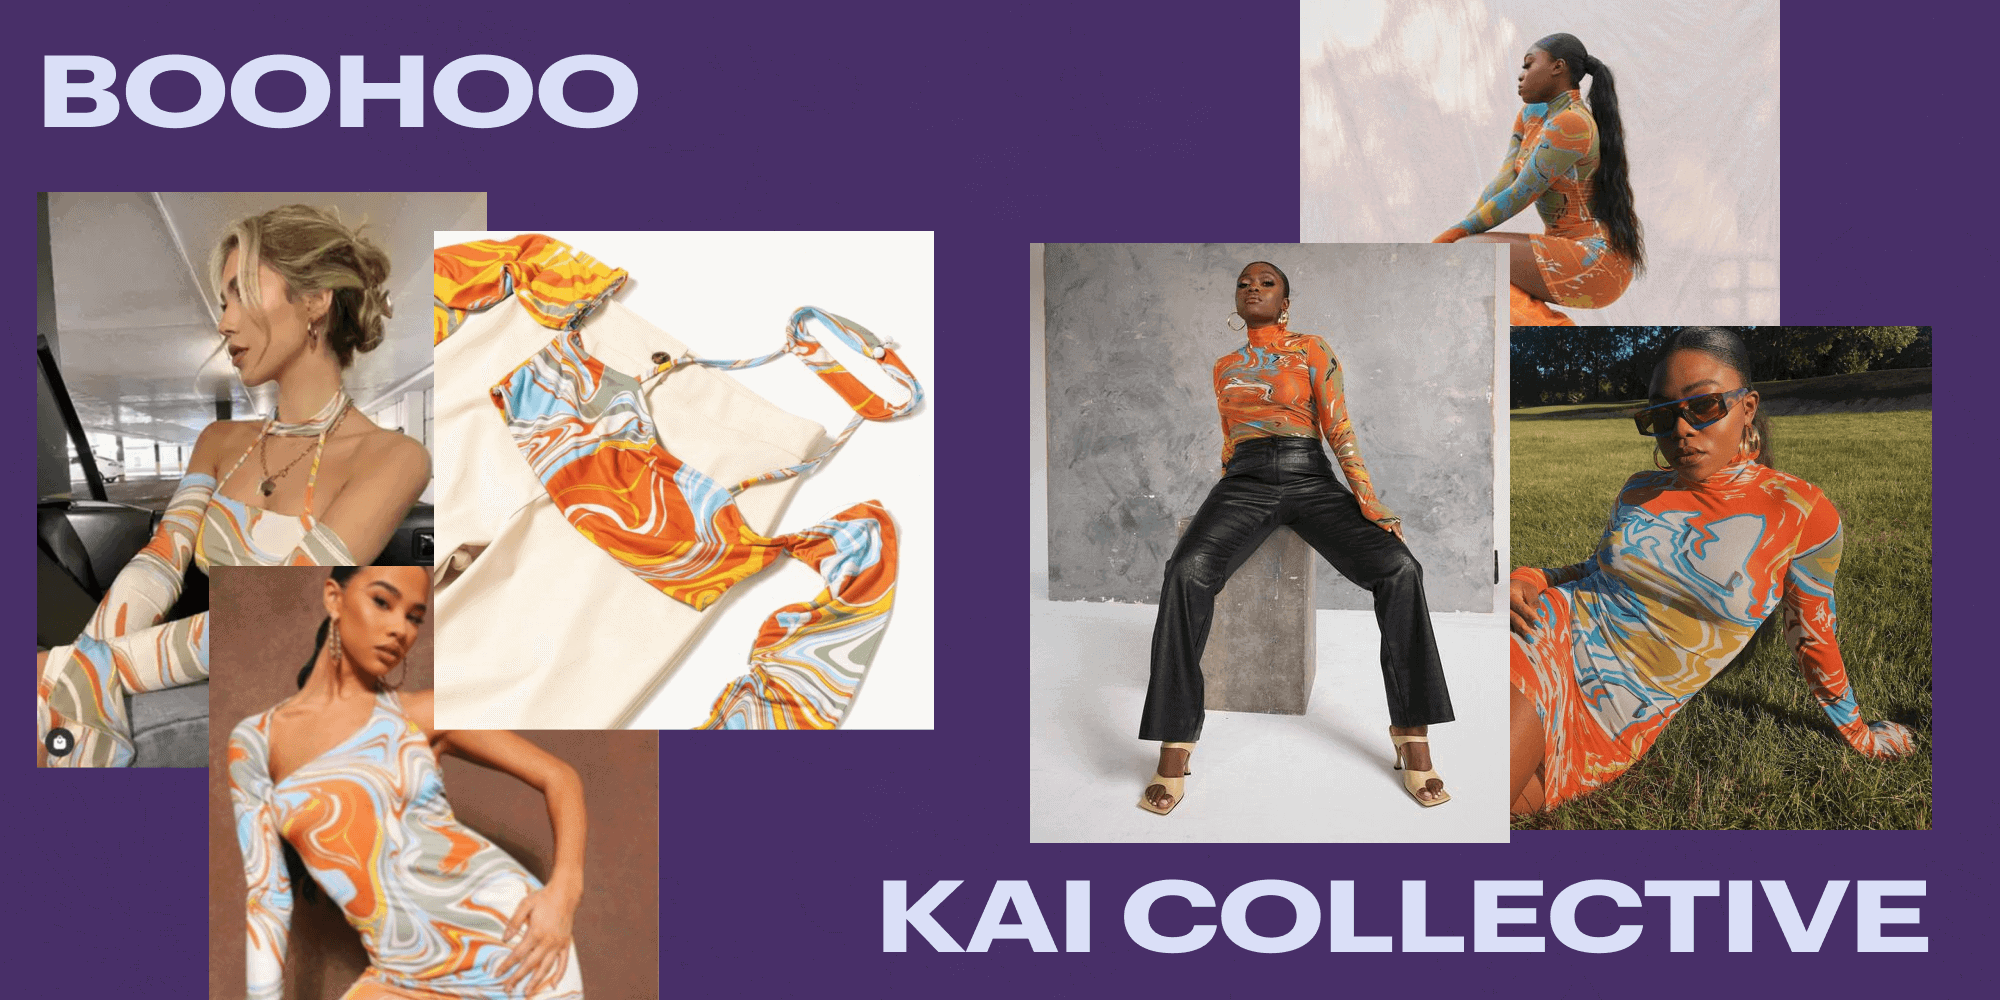 Kai Collective vs Boohoo: Why we need to reevaluate our relationship with fast fashion